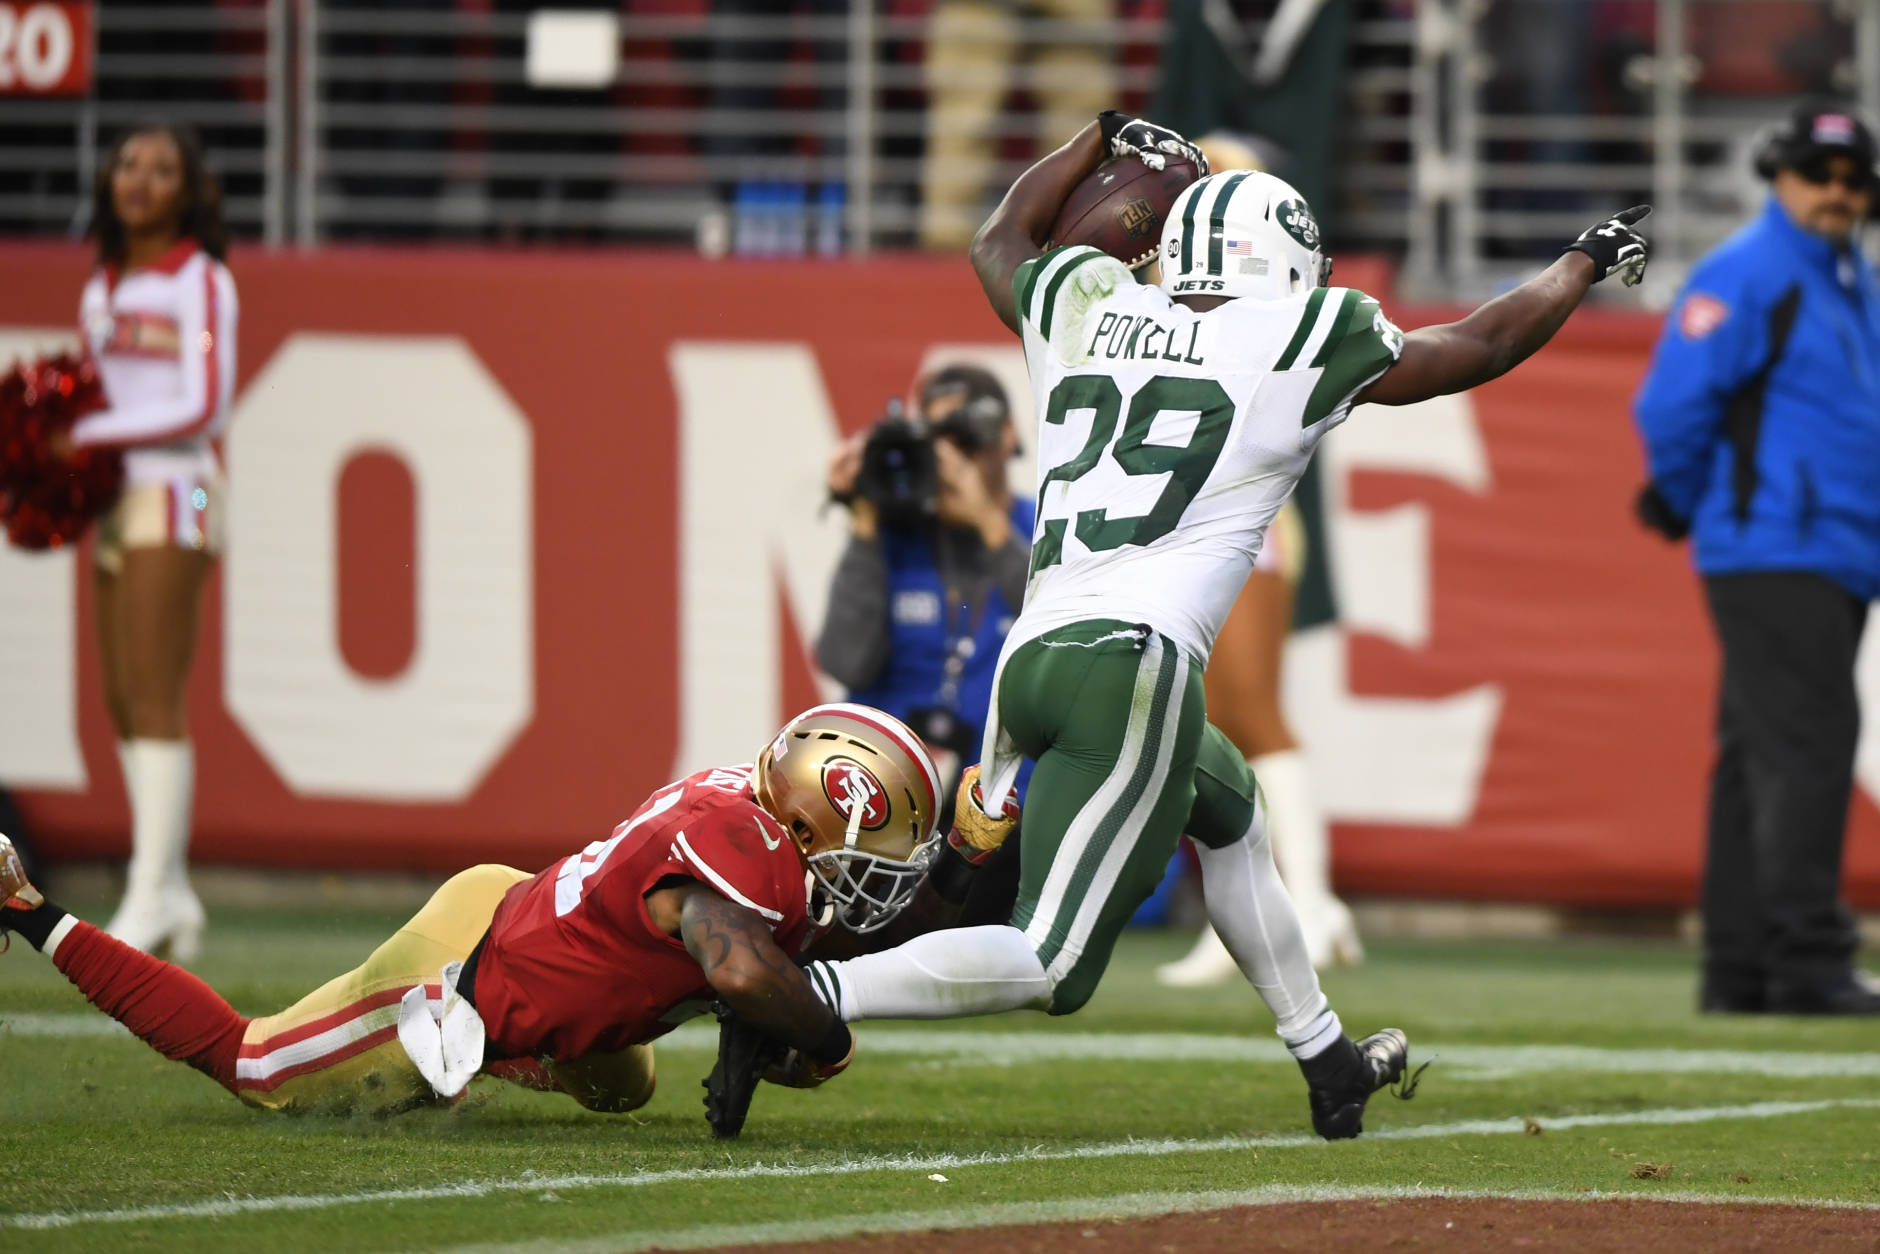 SANTA CLARA, CA - DECEMBER 11:  Bilal Powell #29 of the New York Jets rushes for a 19-yard touchdown to beat the San Francisco 49ers in overtime in their NFL game at Levi's Stadium on December 11, 2016 in Santa Clara, California.  (Photo by Thearon W. Henderson/Getty Images)